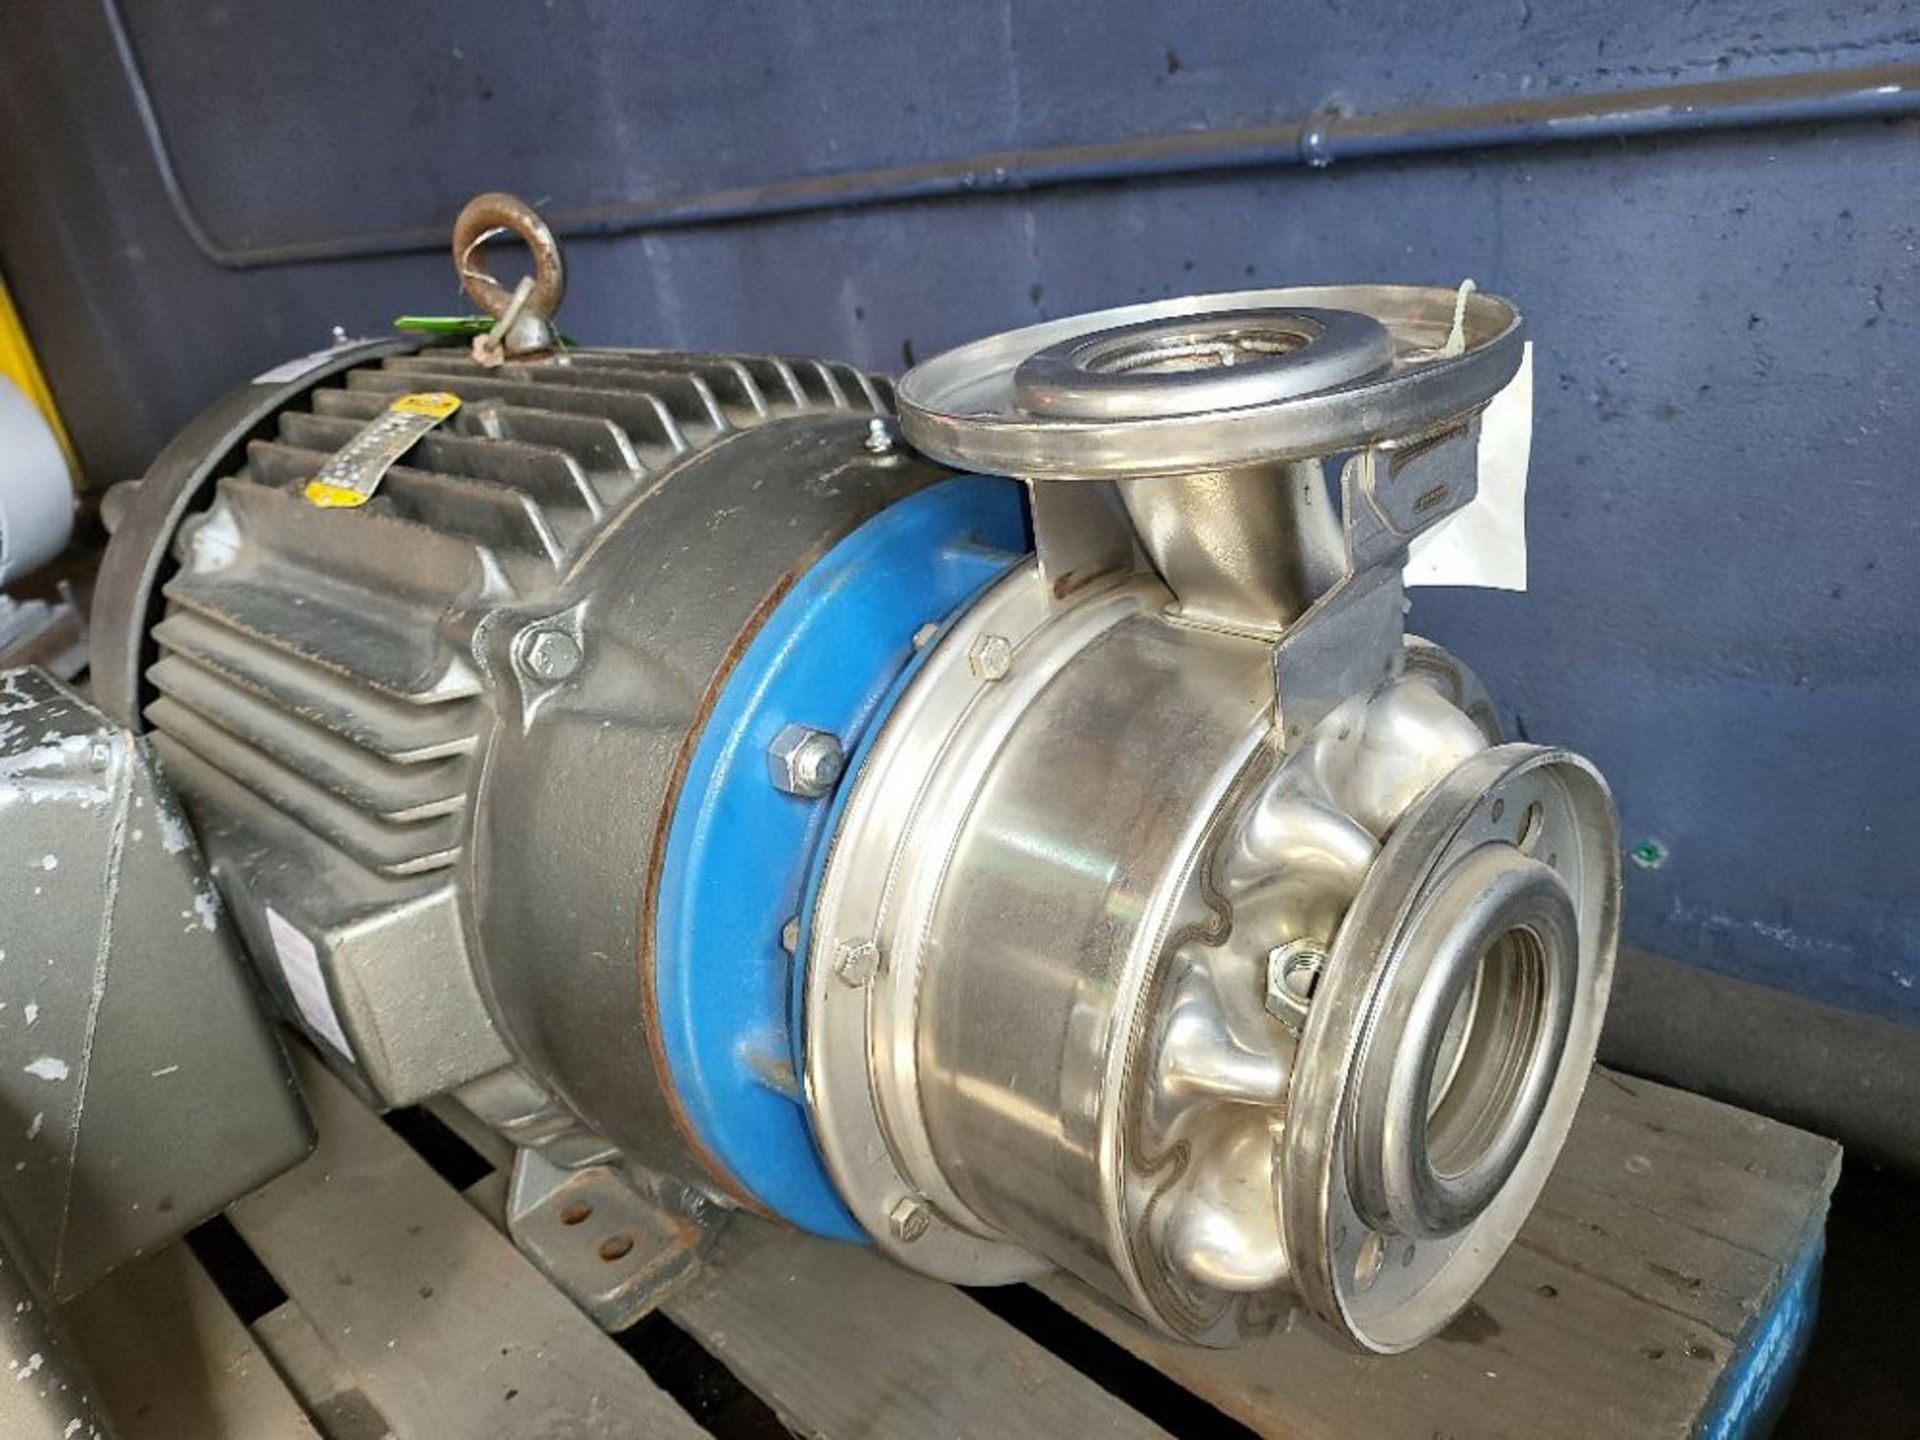 Qty (1) Centrifugal Pump - 40 hp - 3550 rpm - 3 phase - 230/460V- 3 1/4 inch inlet flange commection - Image 2 of 2